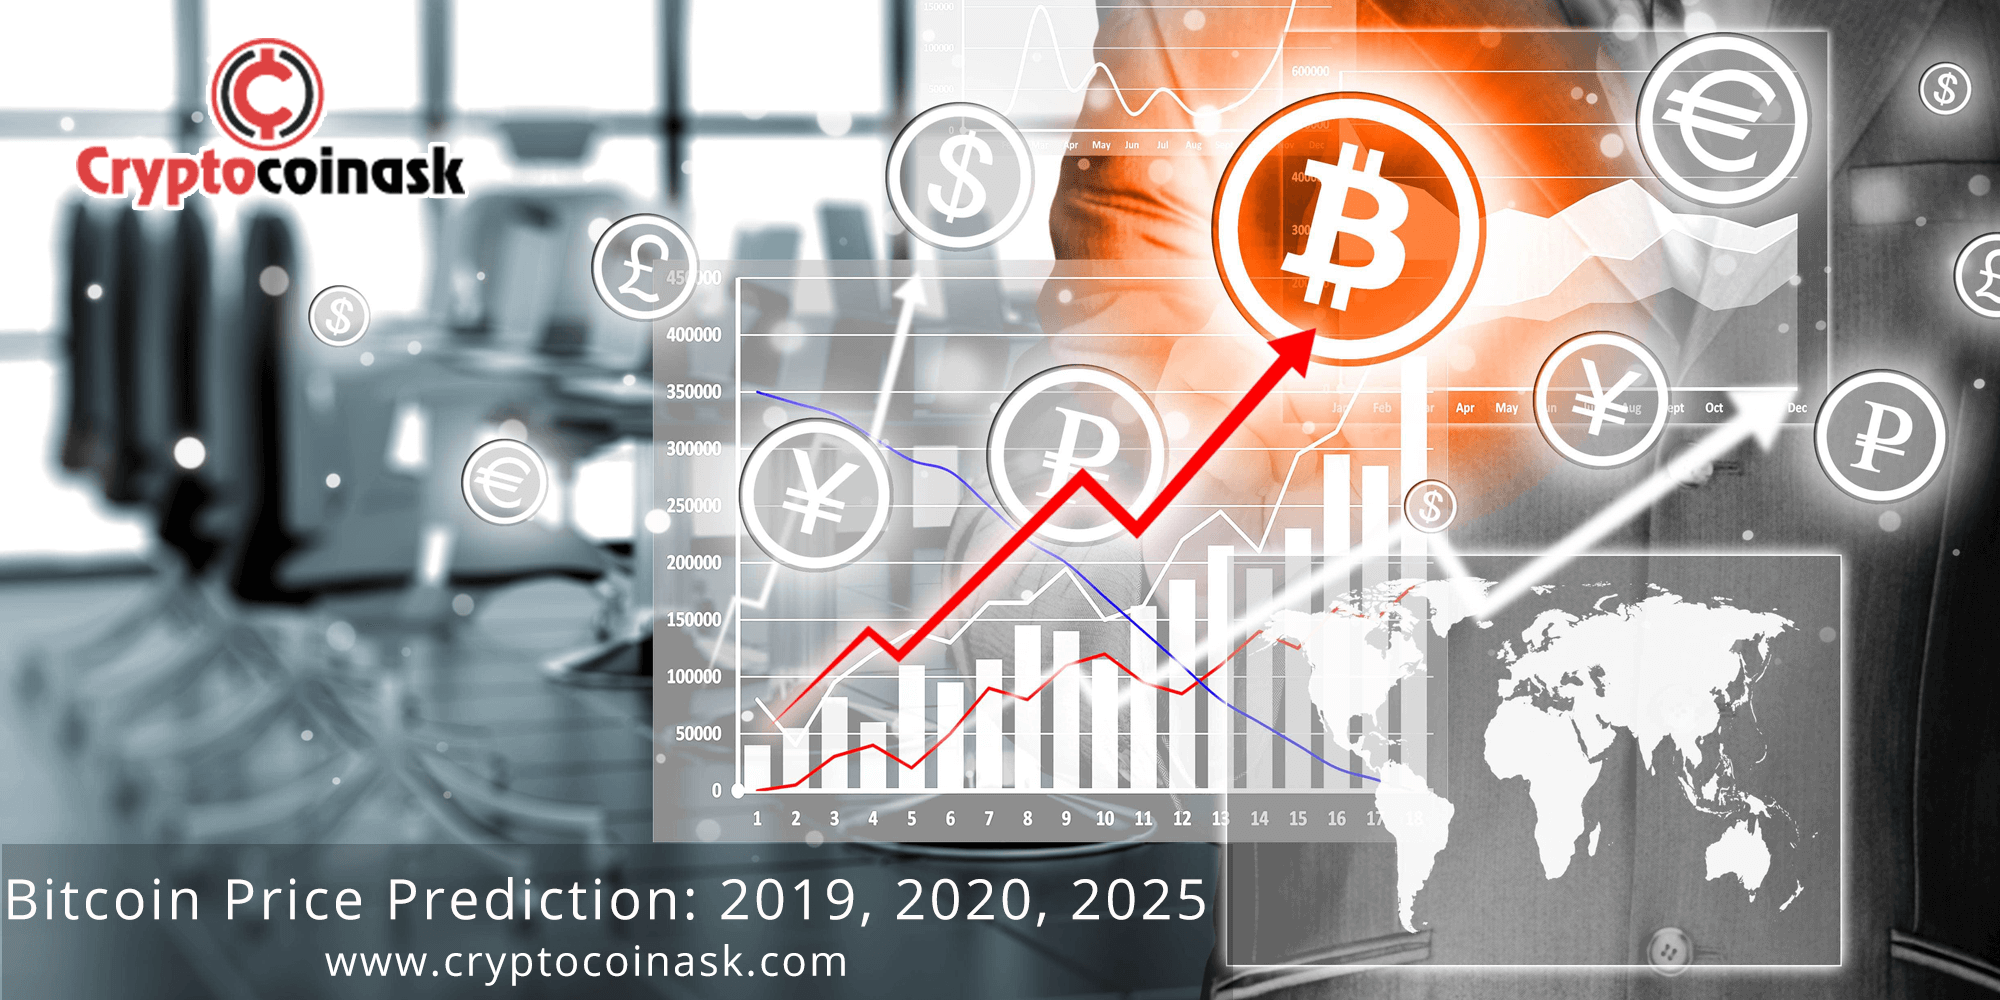 Bitcoin Price Prediction 2019 2020 2025 From Dif!   ferent Experts - 